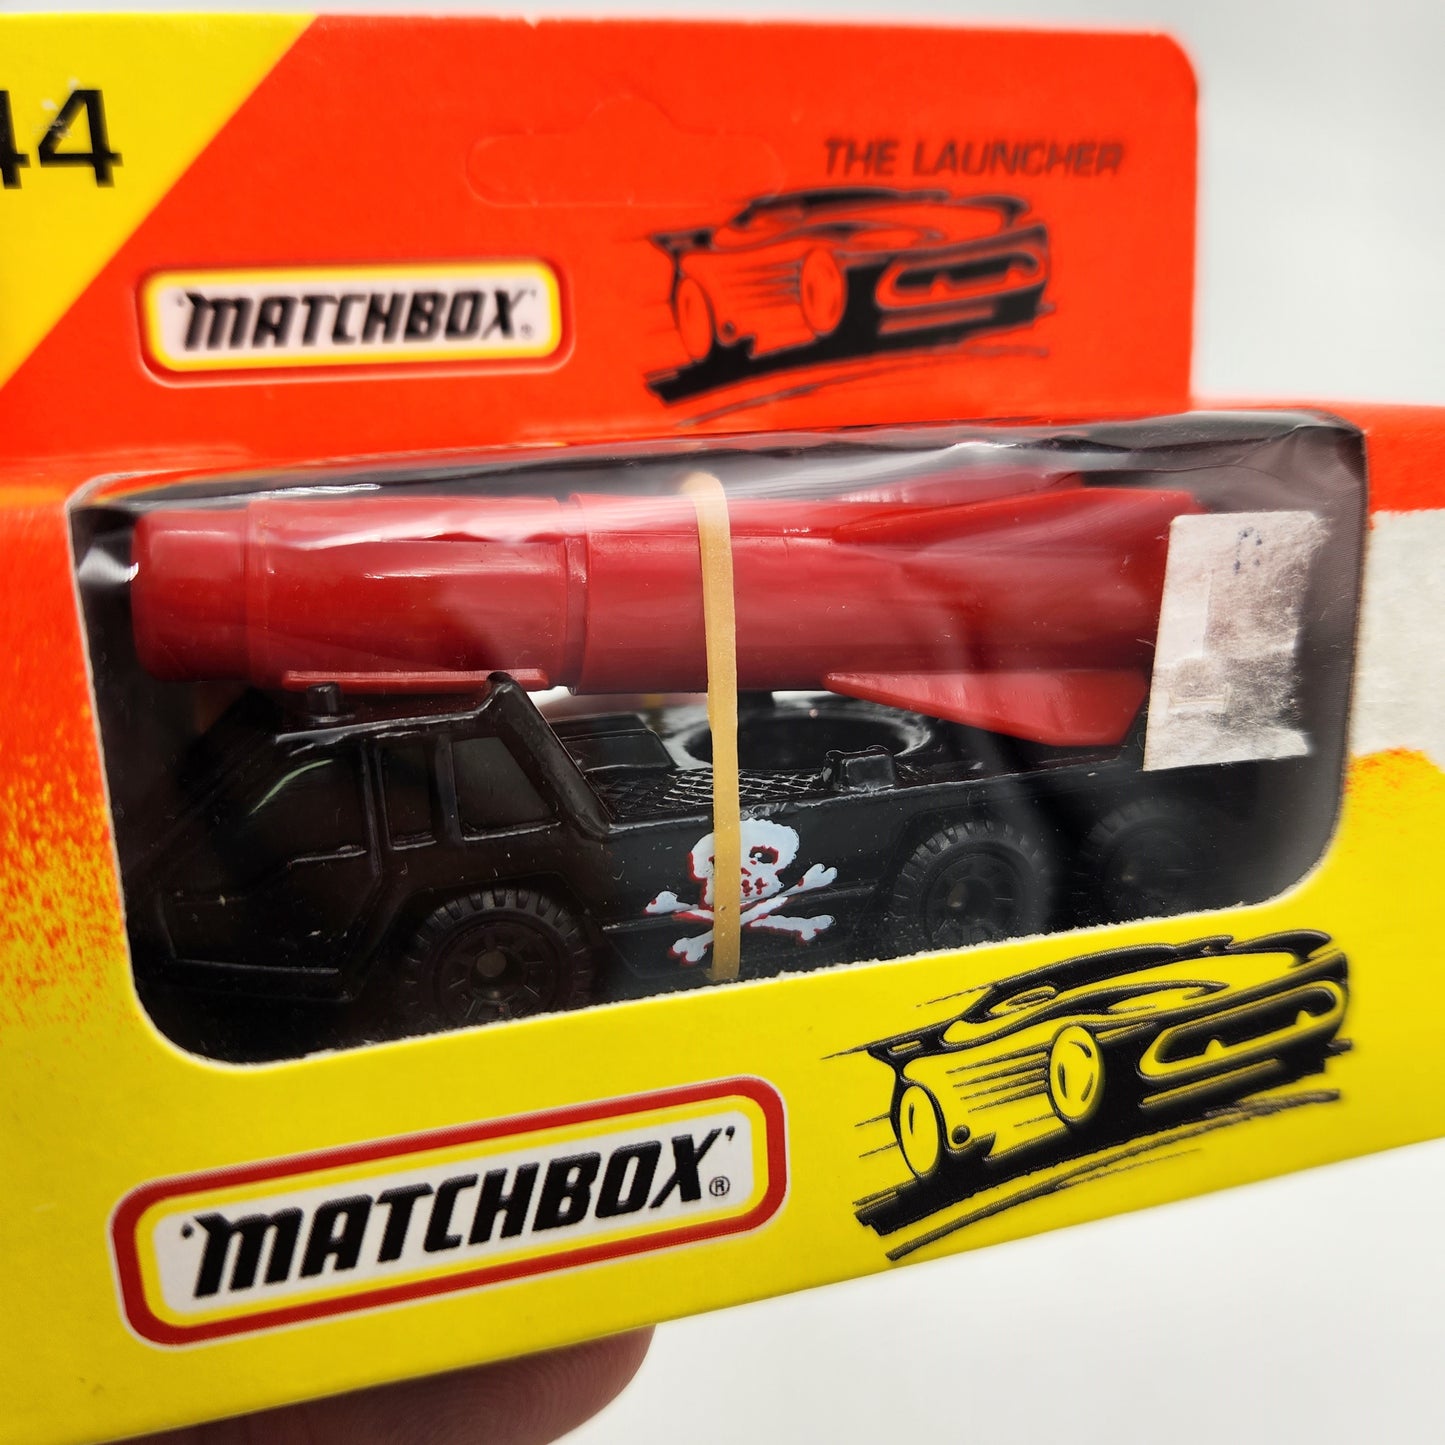 Matchbox - The Launcher #44 - 1:64 Scale